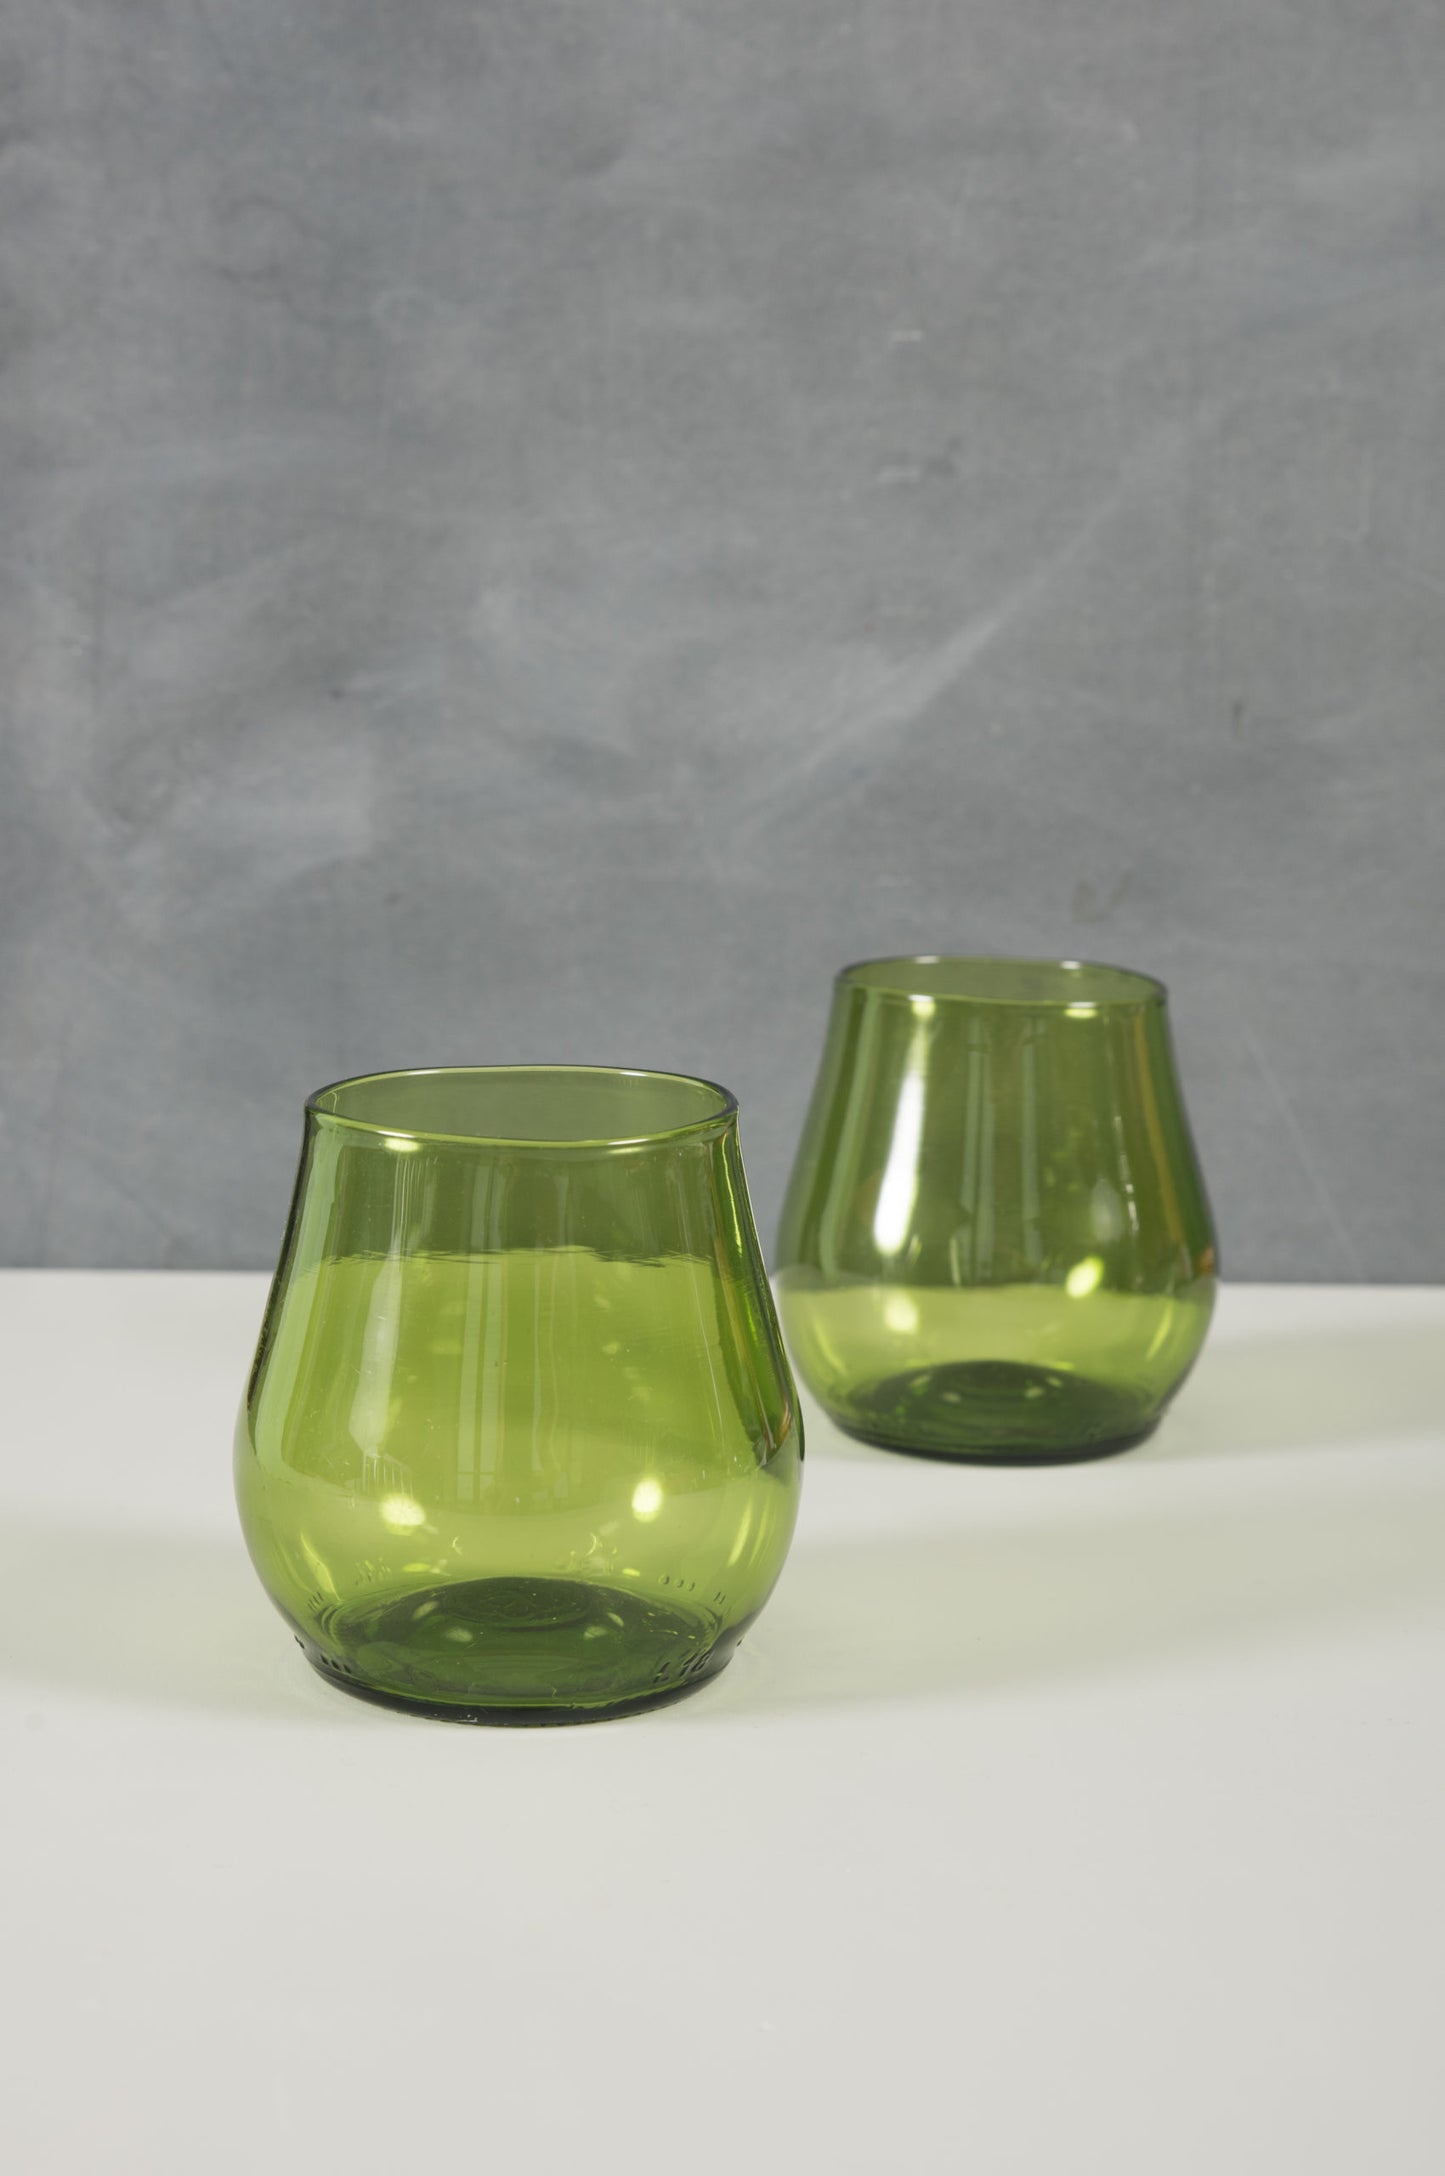 forest water or wine glasses made from recycled glass